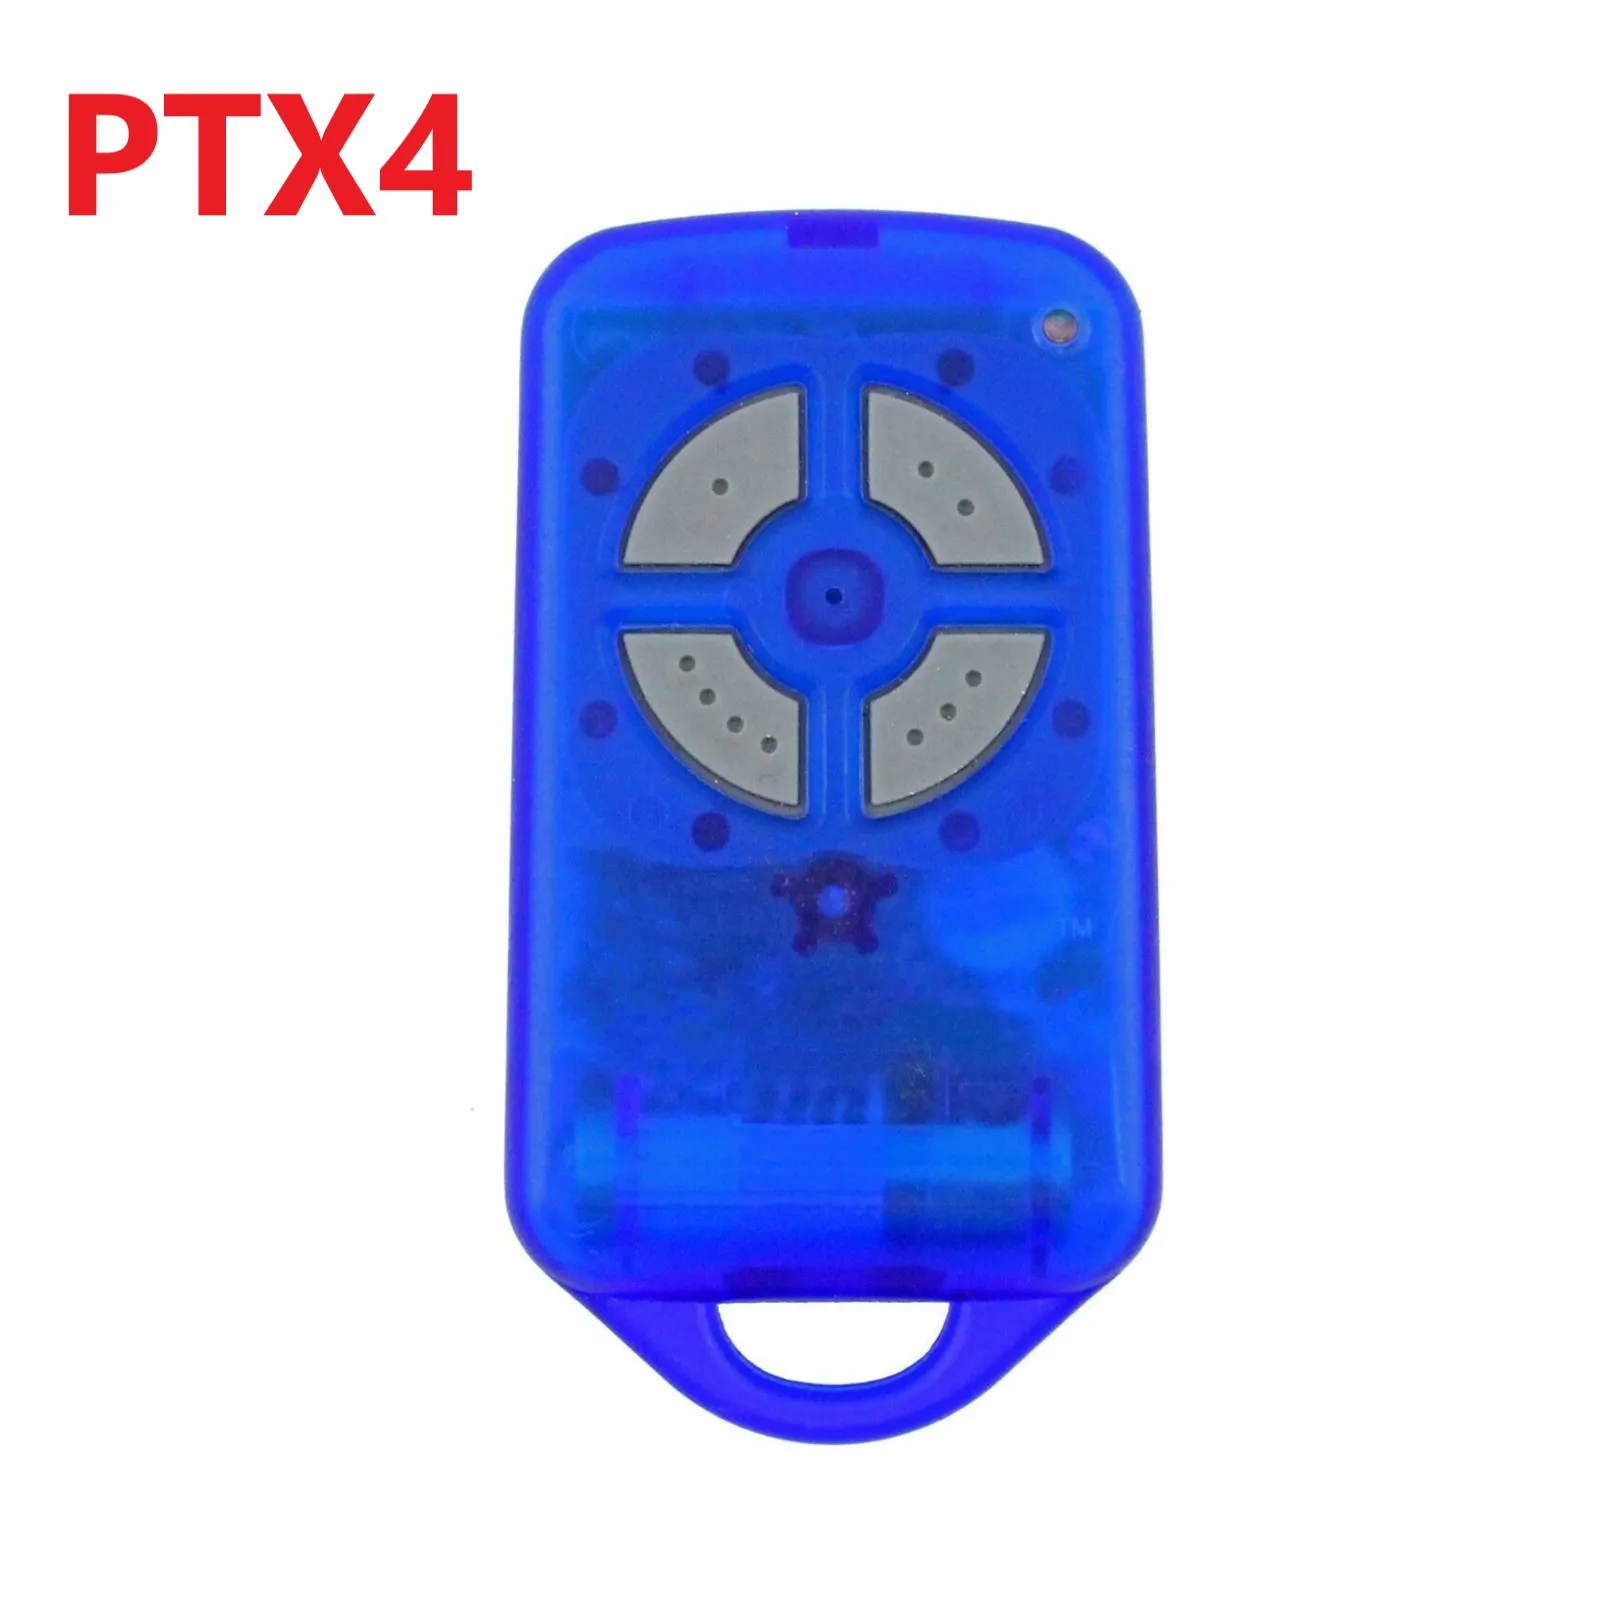 For ATA PTX4 433.92 MHz 4 Button Garage Gate Door Replacement Remote Control Transmitter